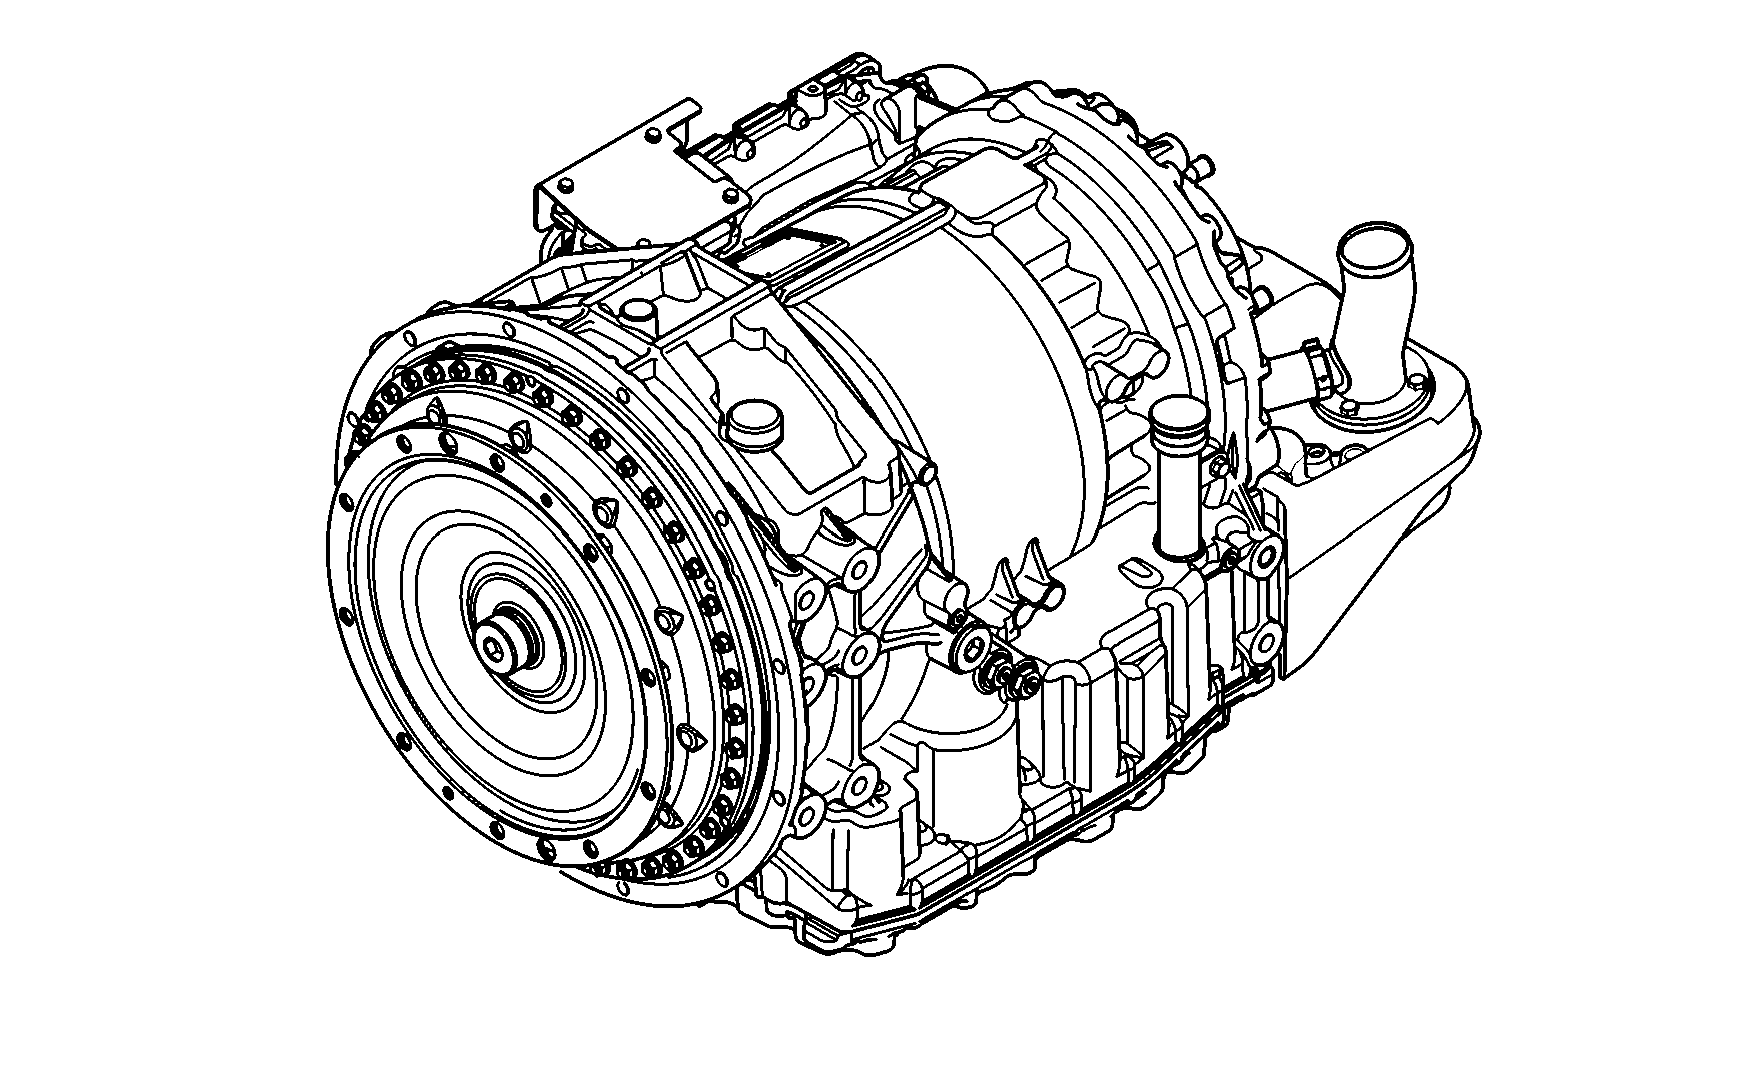 drawing for SCANIA 2310394 - 6 AP 1400 B (figure 1)